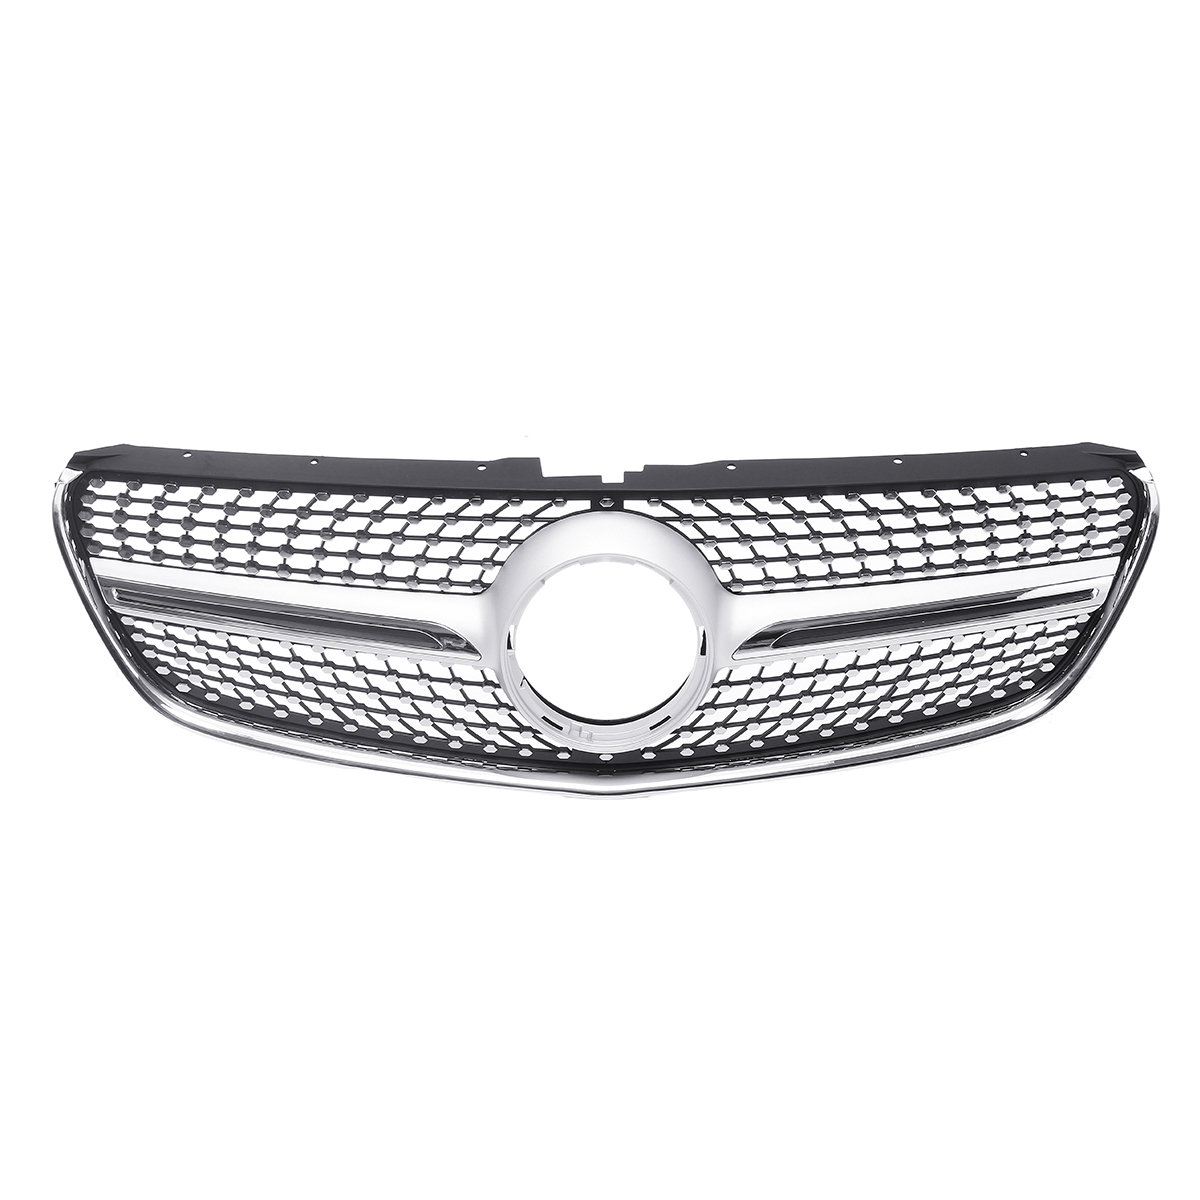 Silver Diamond Style Front Bumper Grille Grill for Mercedes Benz V Class W447 15-18